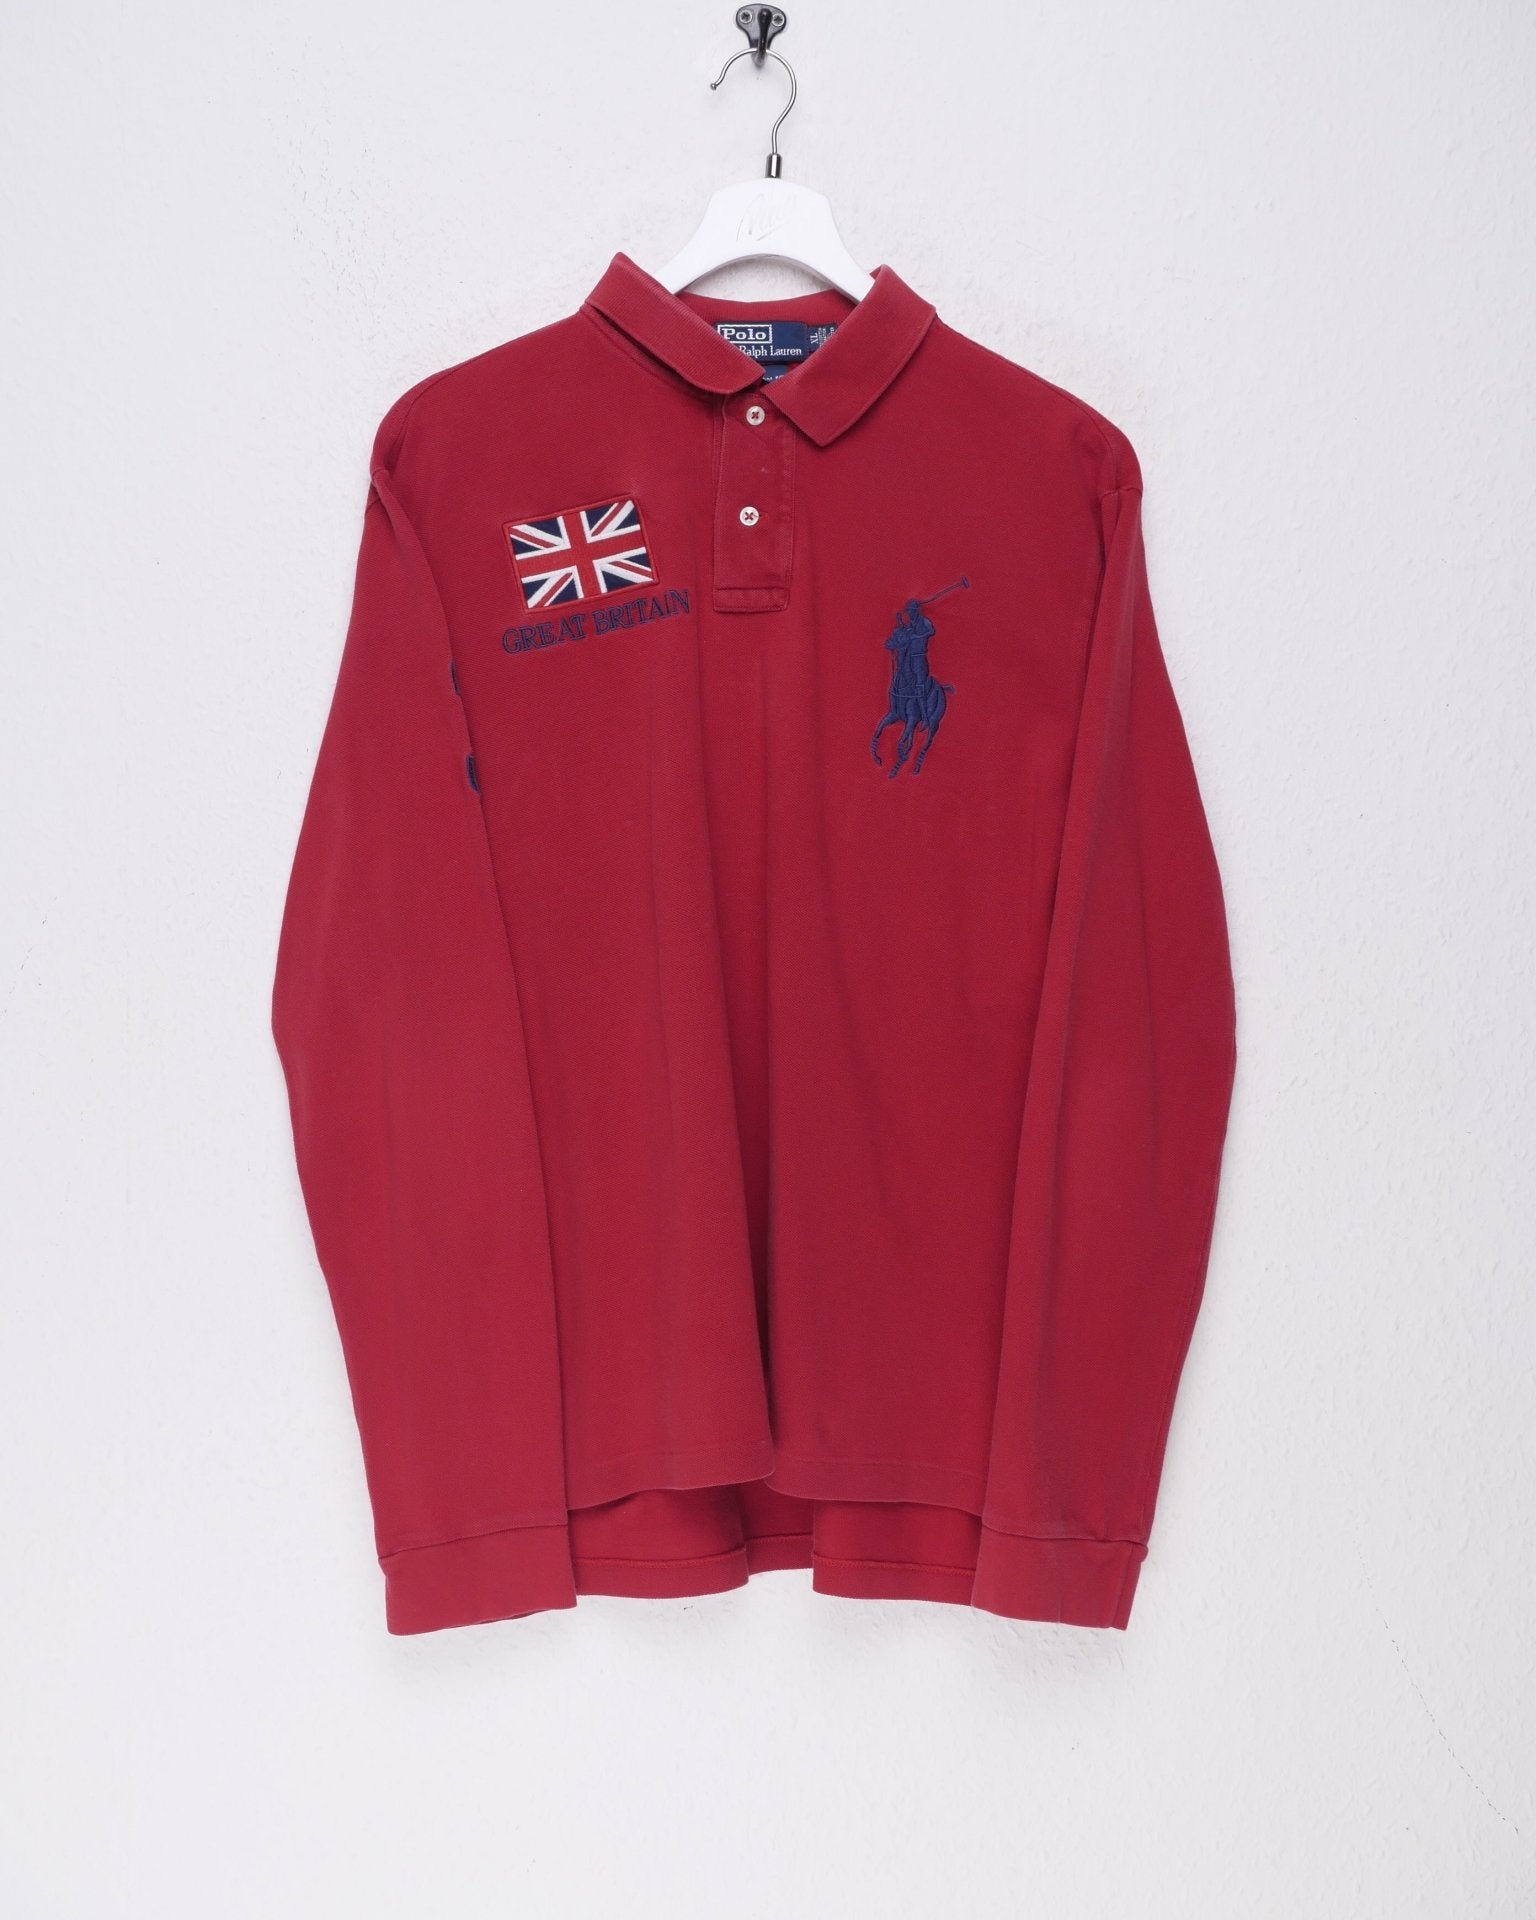 Polo 'Great Britain' embroidered Logo L/S Polo Shirt - Peeces